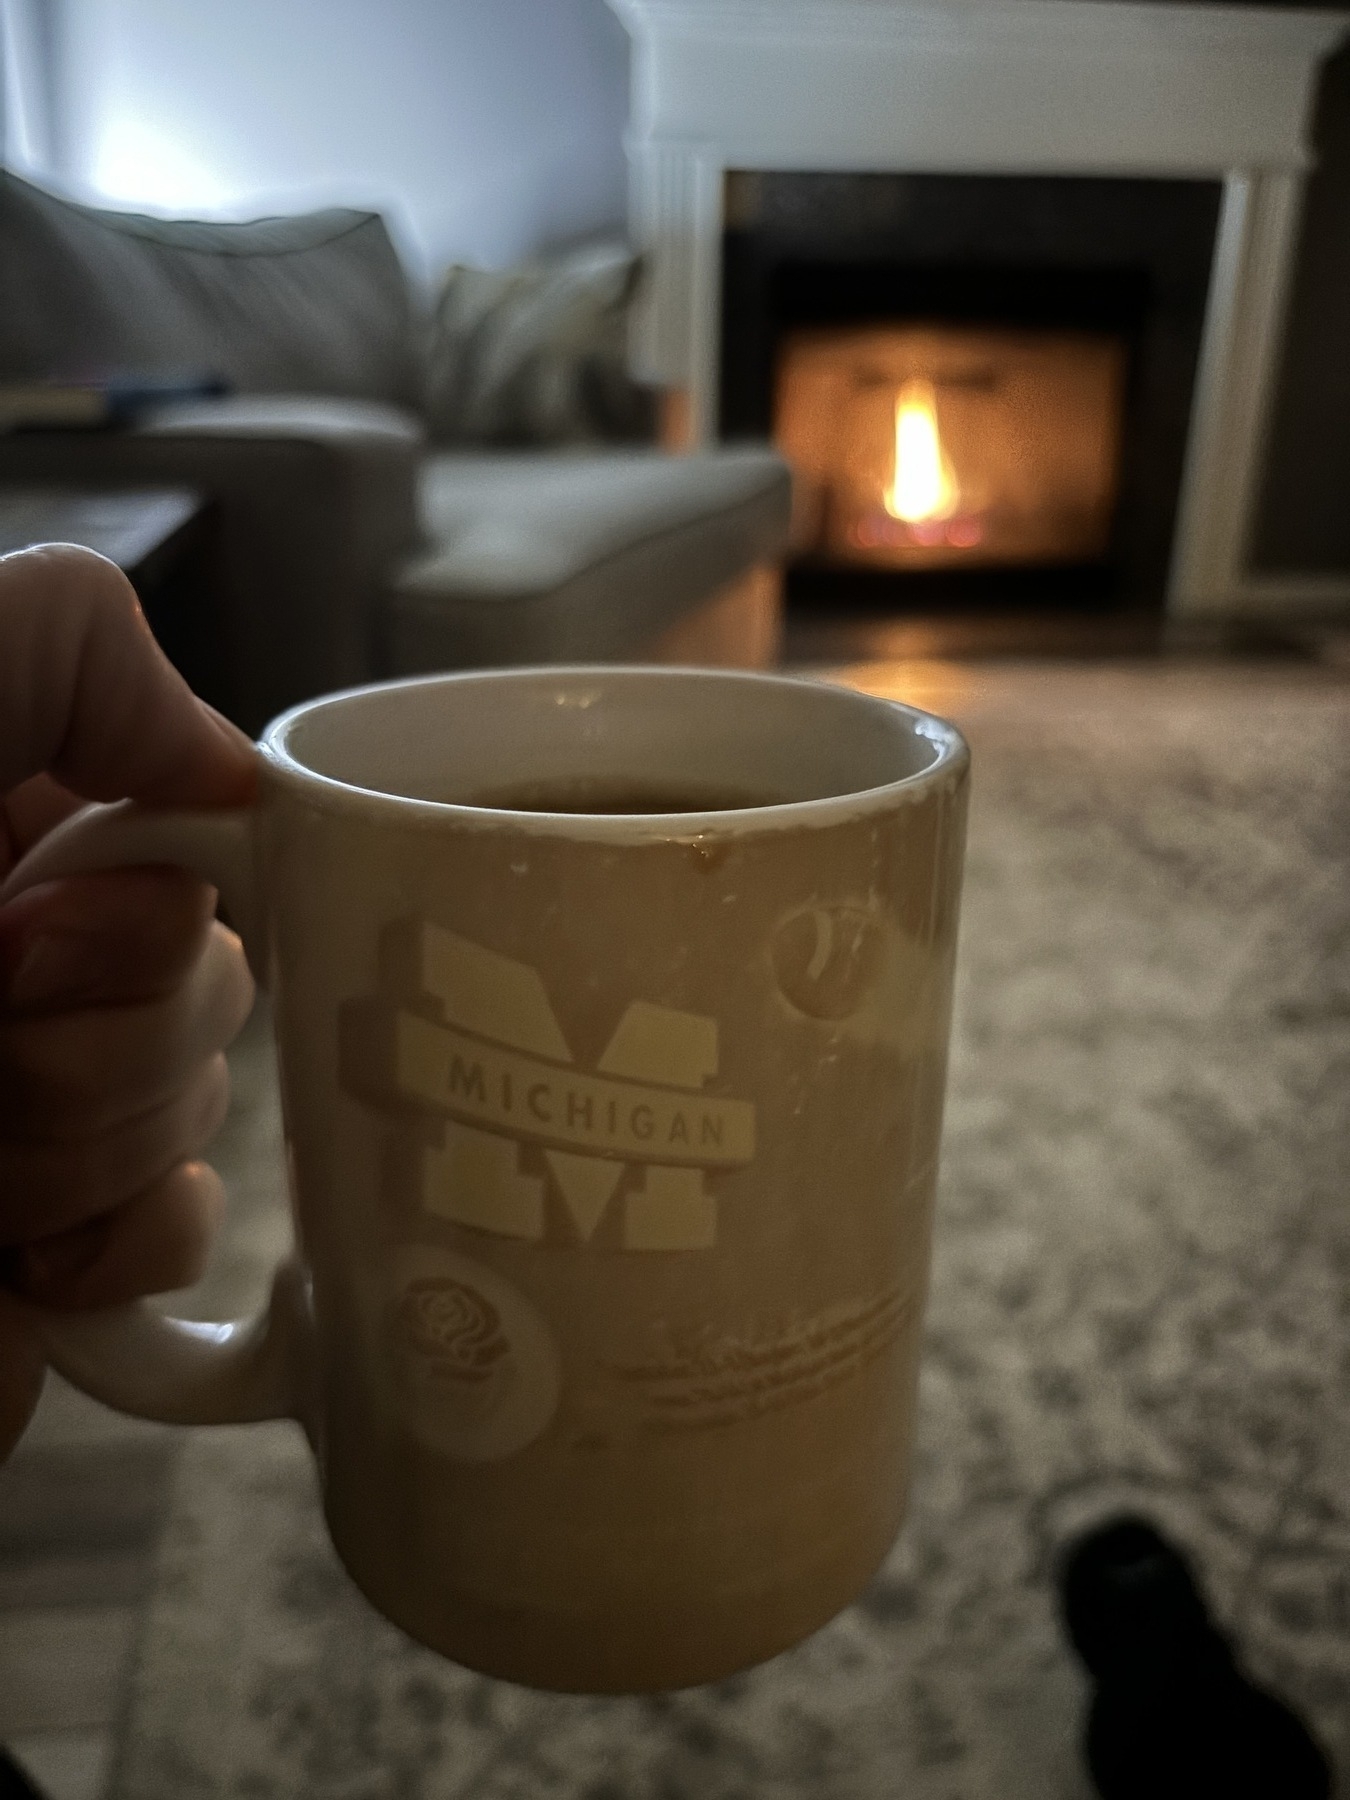 A university of Michigan coffee mug in front of an inviting fire. 